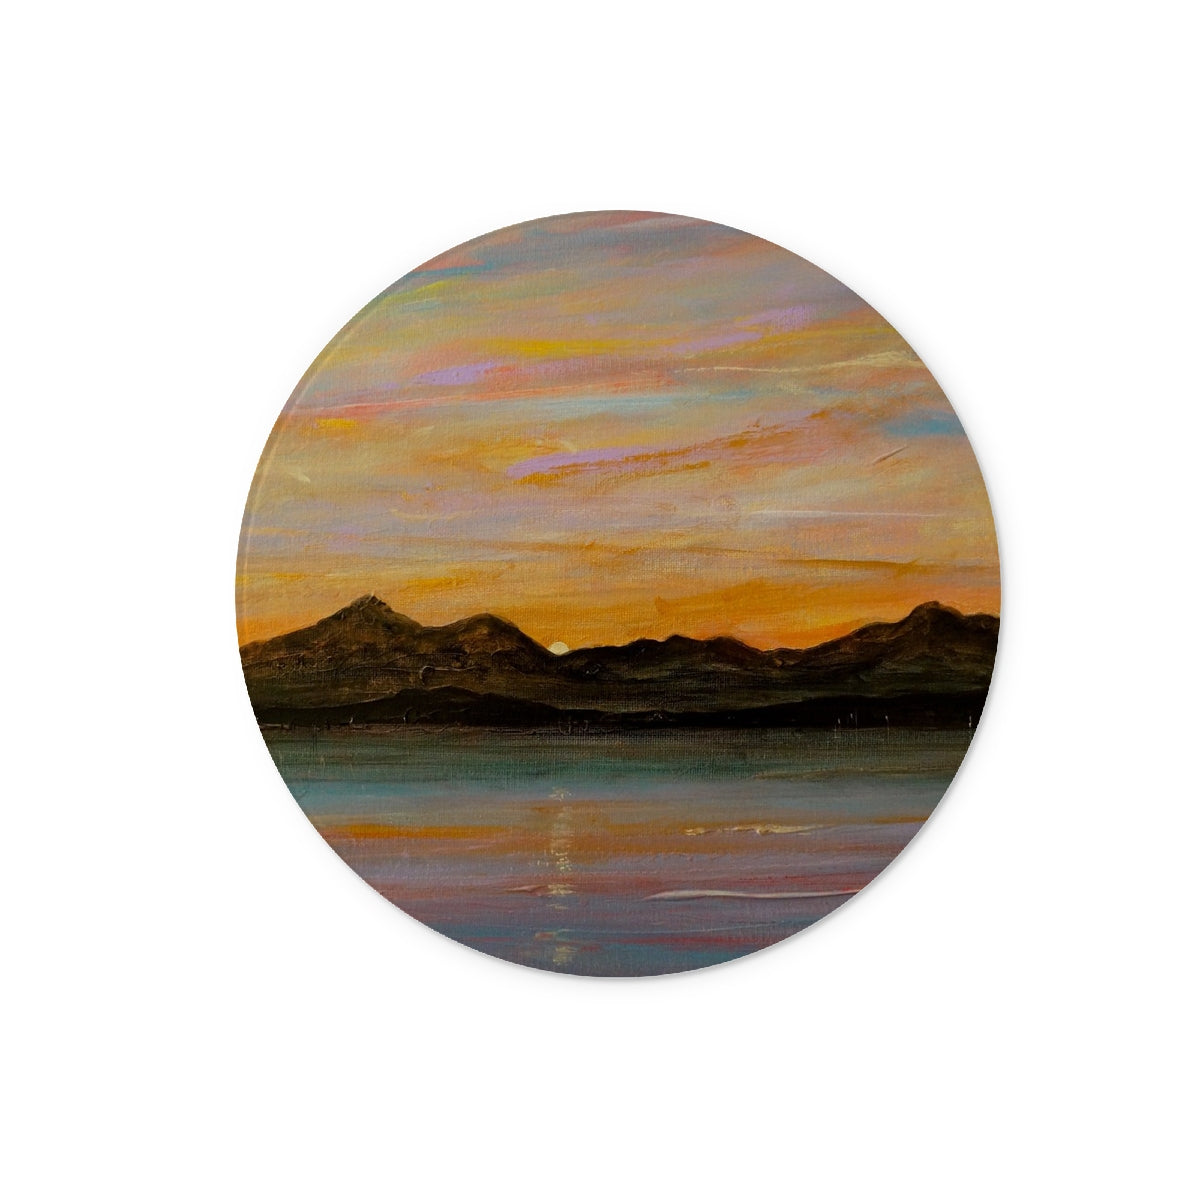 The Sleeping Warrior Arran Art Gifts Glass Chopping Board-Glass Chopping Boards-Arran Art Gallery-12" Round-Paintings, Prints, Homeware, Art Gifts From Scotland By Scottish Artist Kevin Hunter